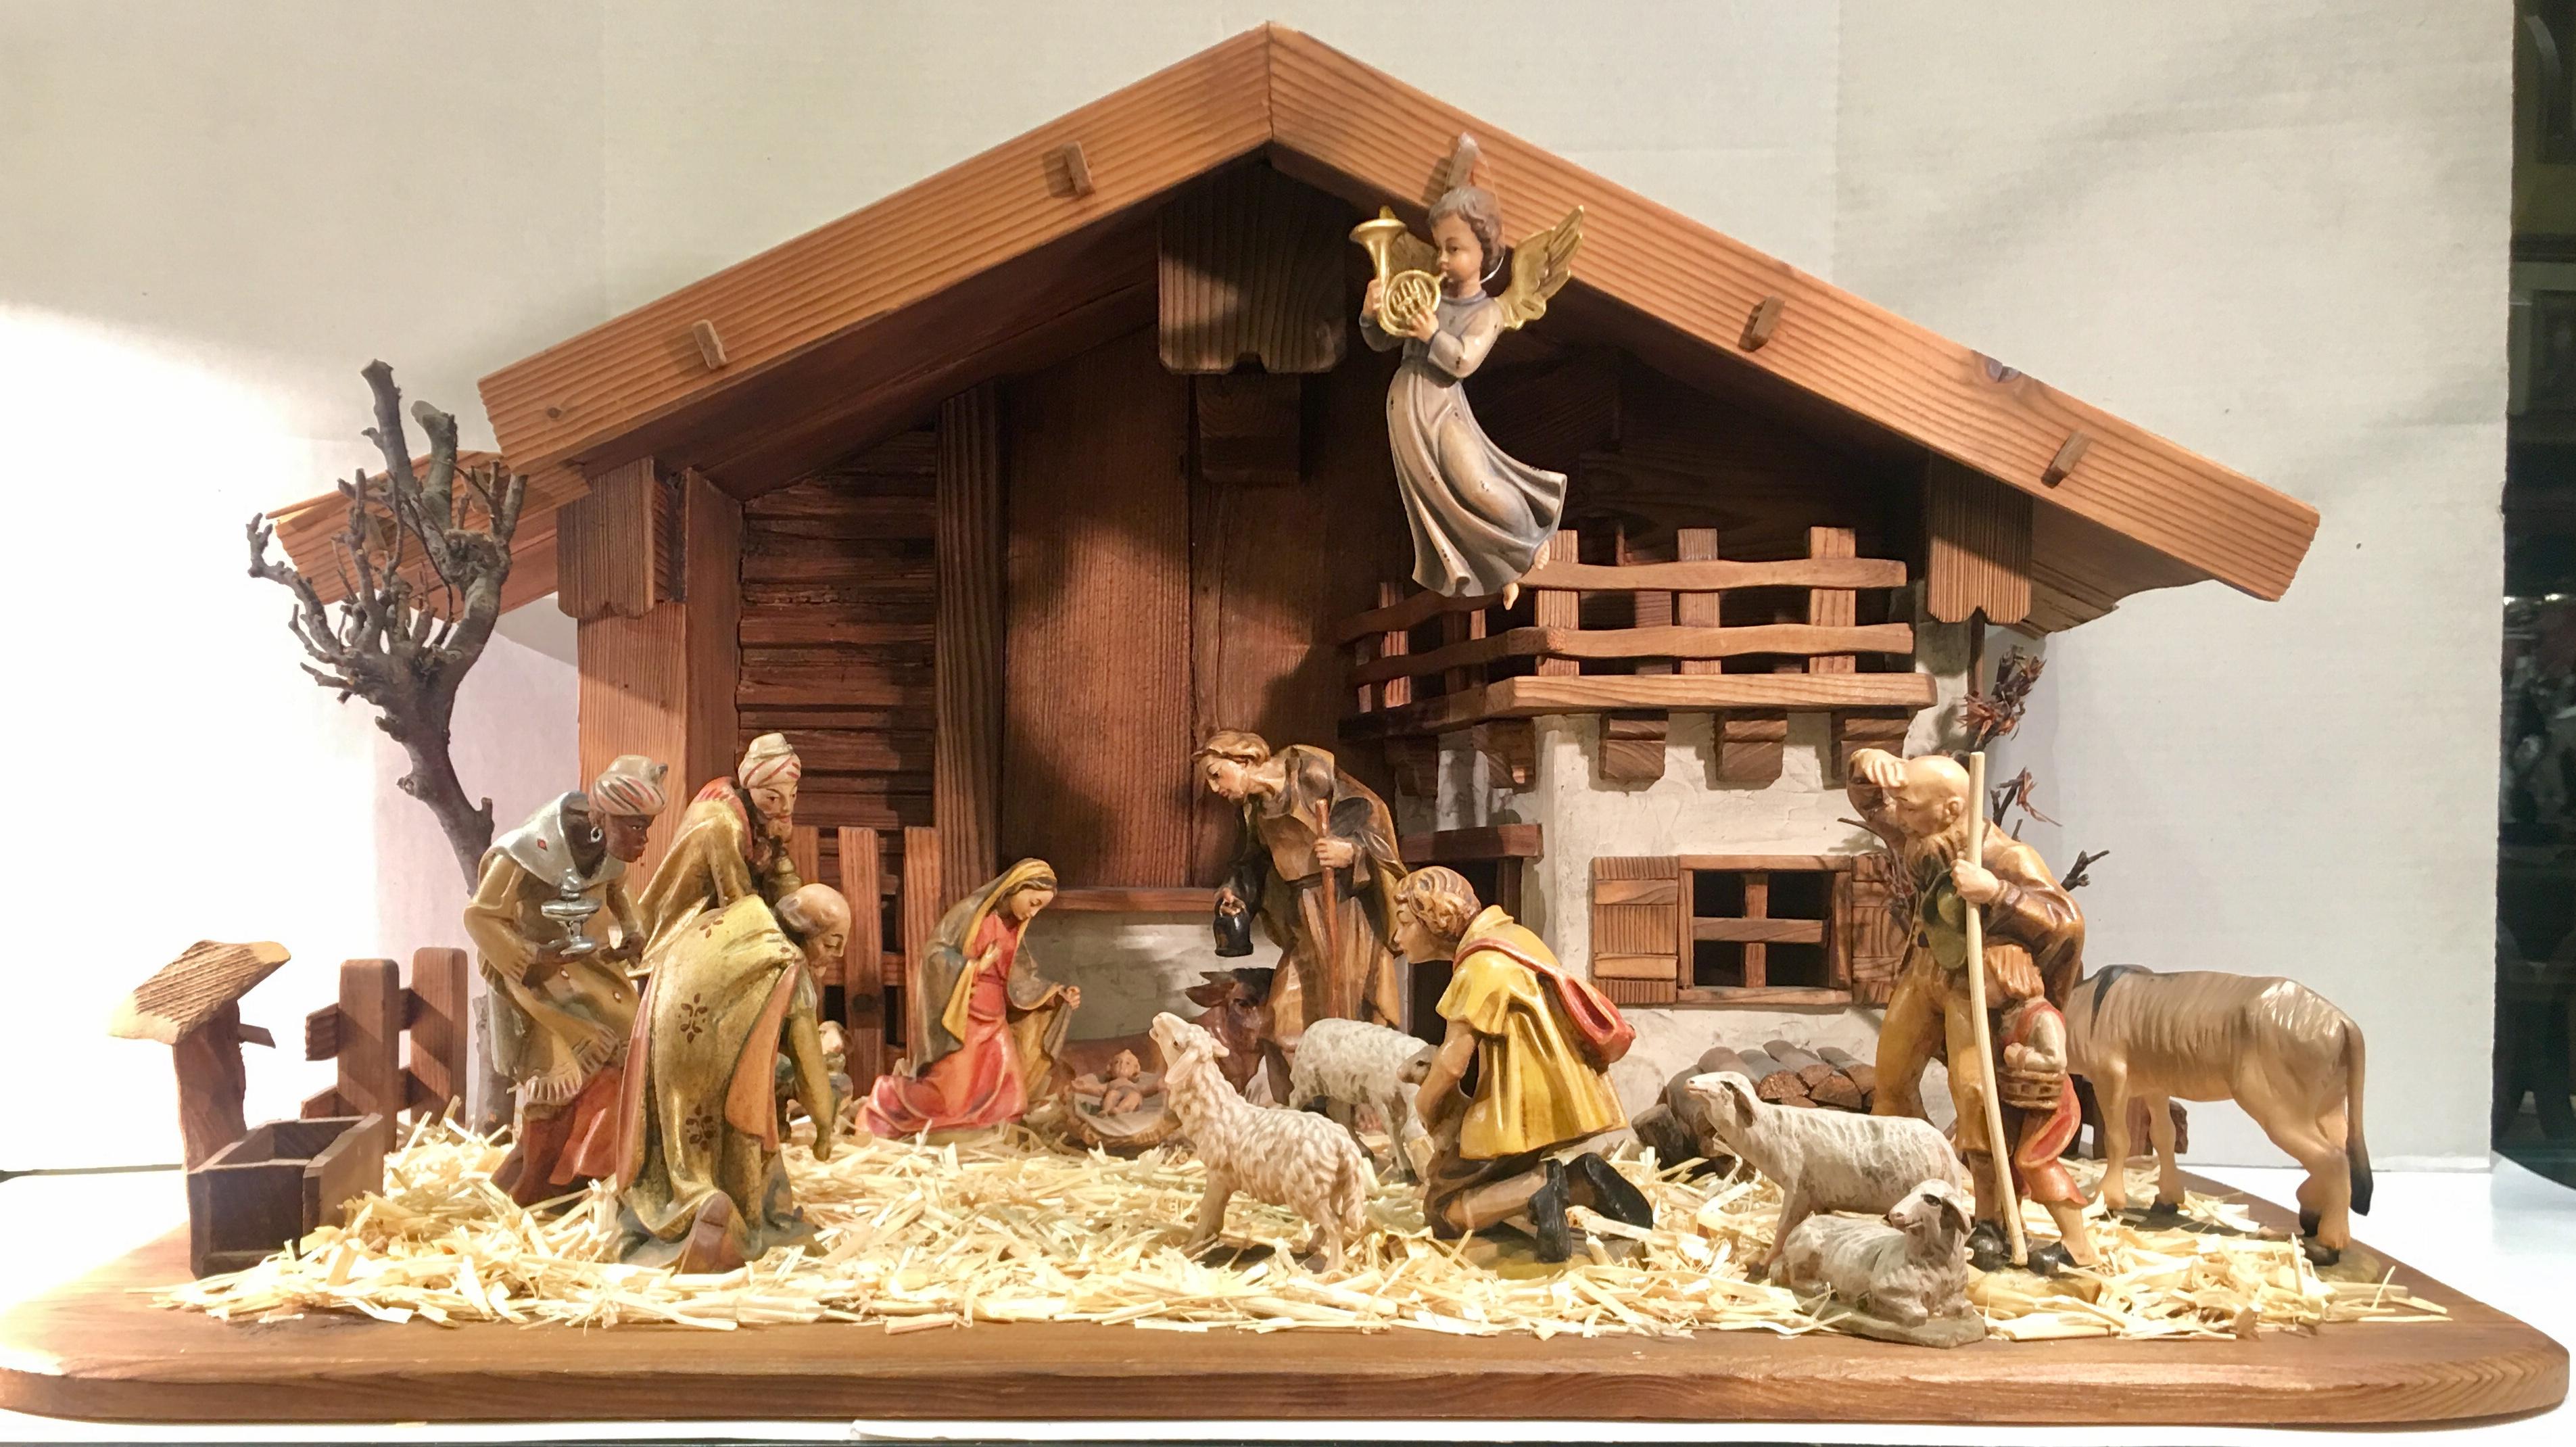 Expedited 3 Day Shipping Available for Delivery Before Christmas - Ask for Quote.

Magnificent, elaborately handmade and hand carved, hand painted, large linden wood nativity scene from the Dementz Family Deur Art Company in South Tyrol, Italy, is a